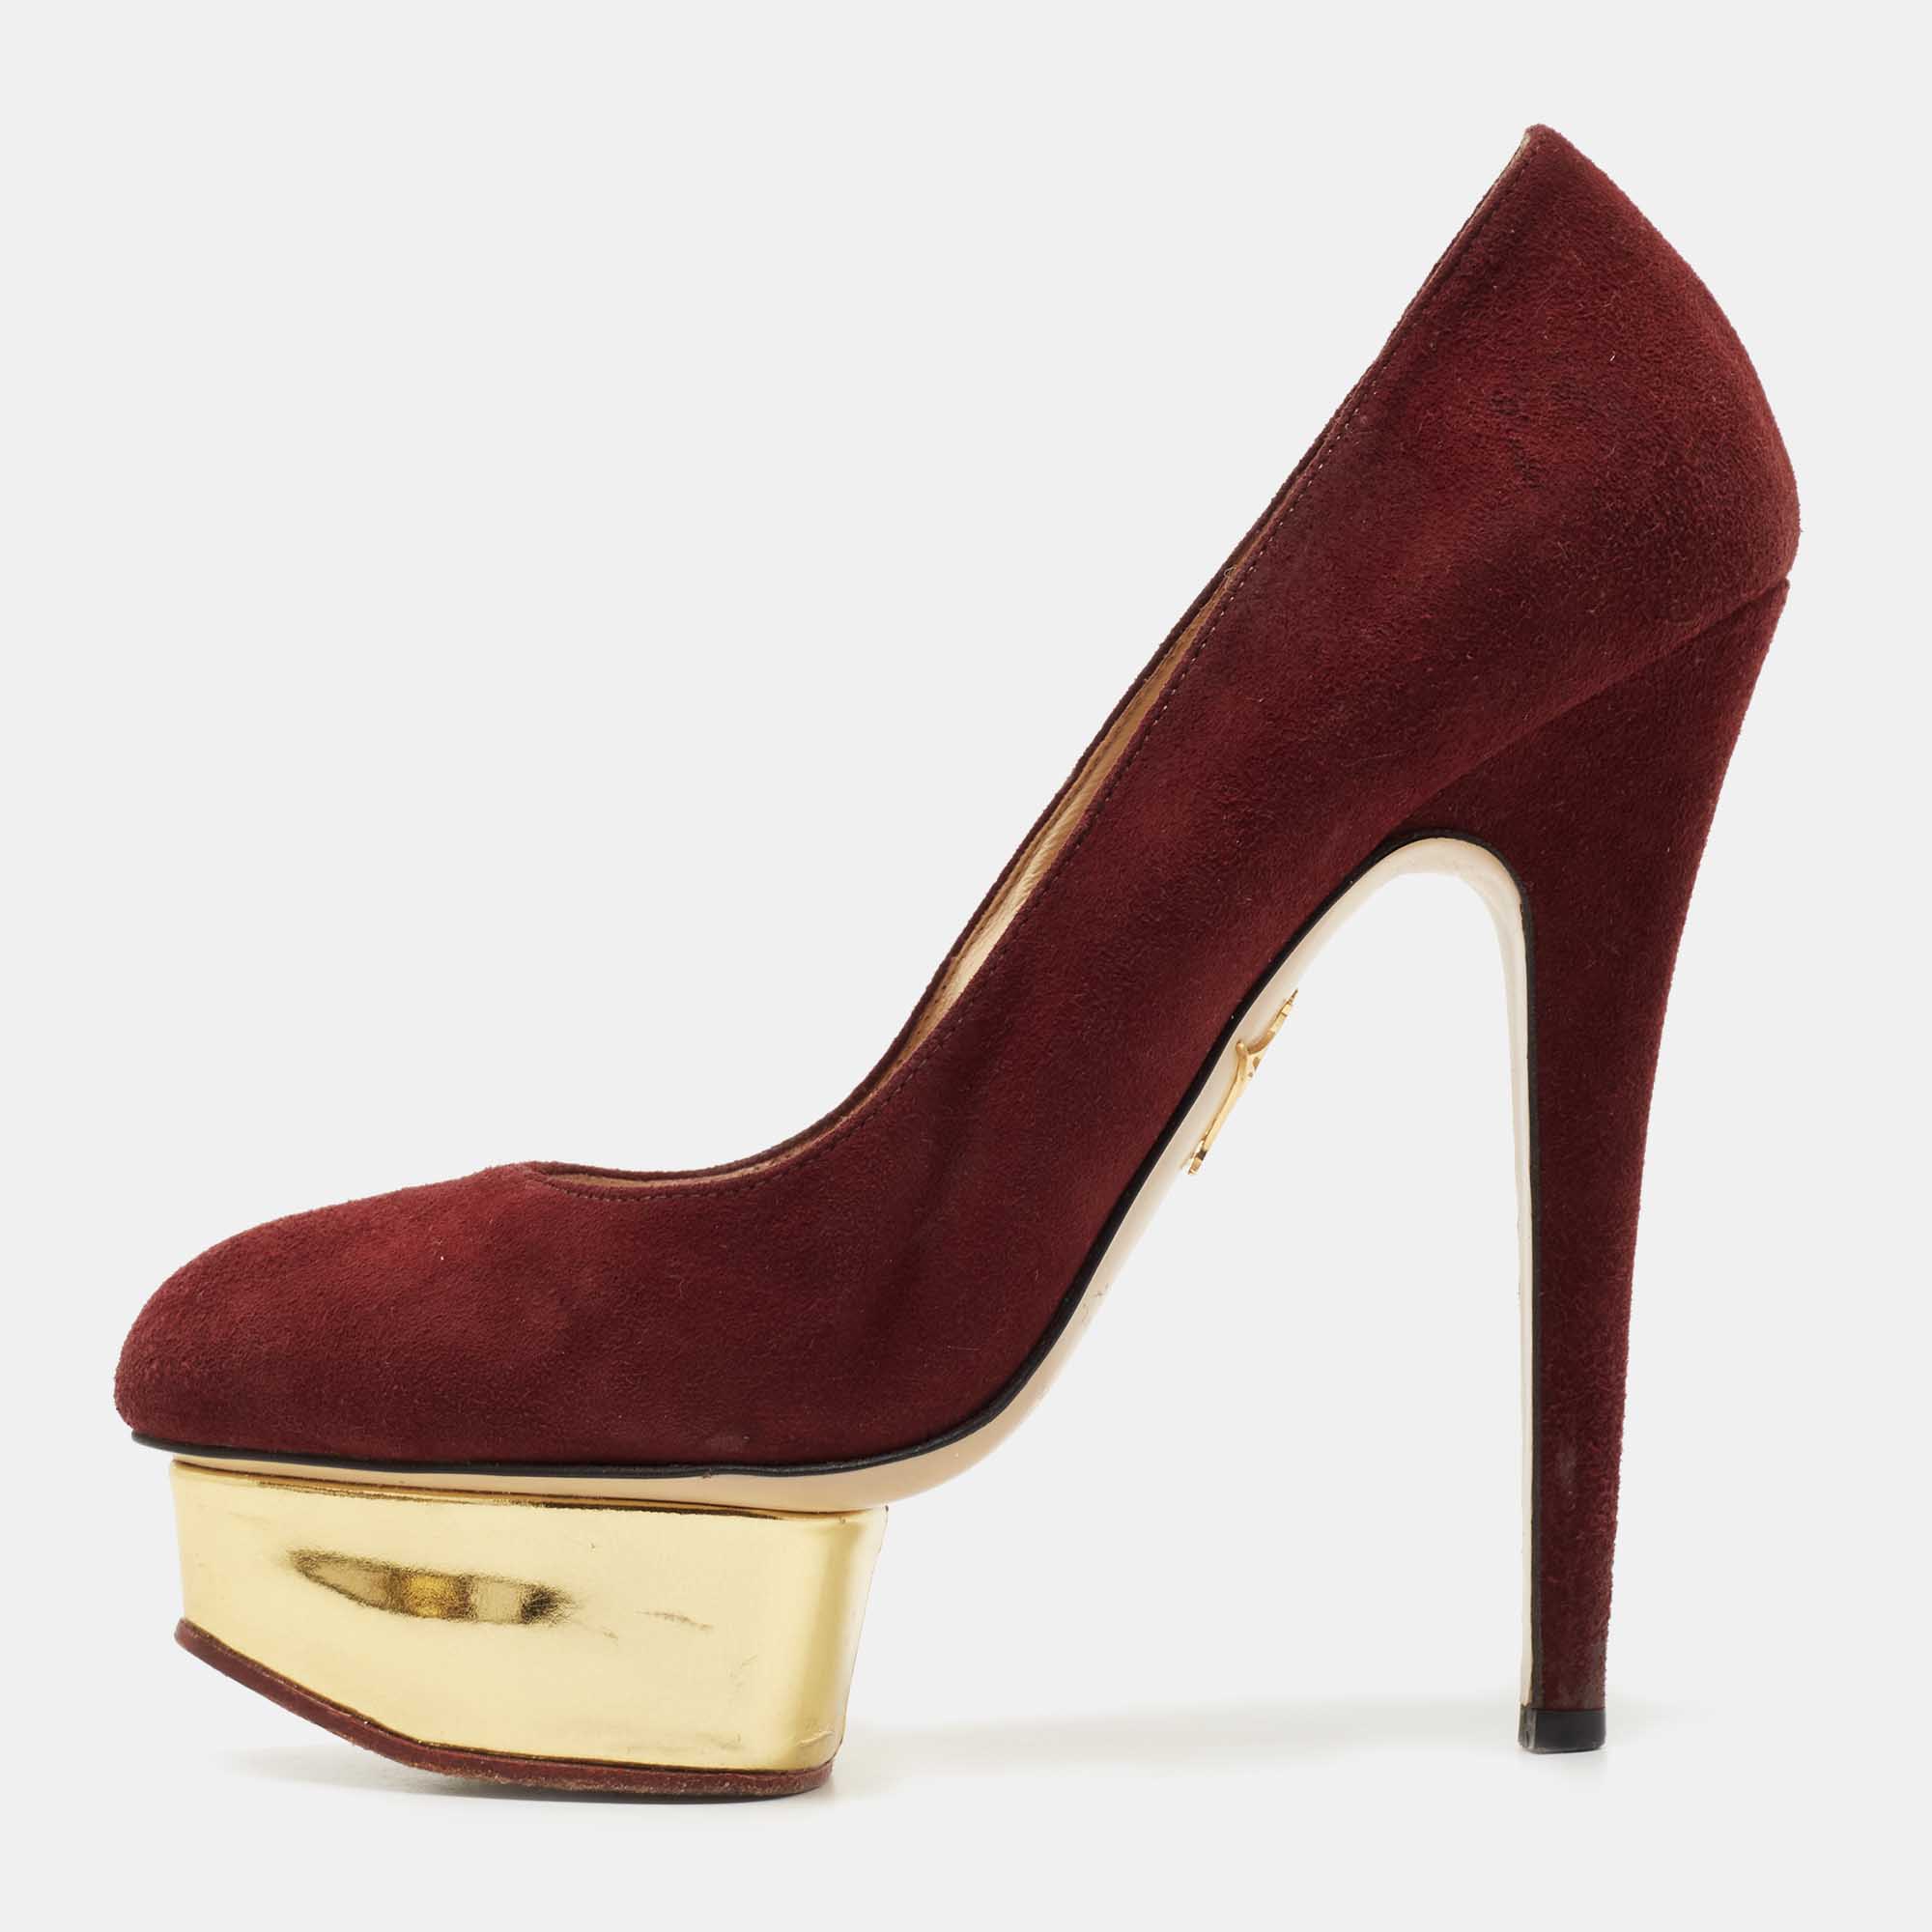 Pre-owned Charlotte Olympia Burgundy Suede Dolly Platform Pumps Size 36.5